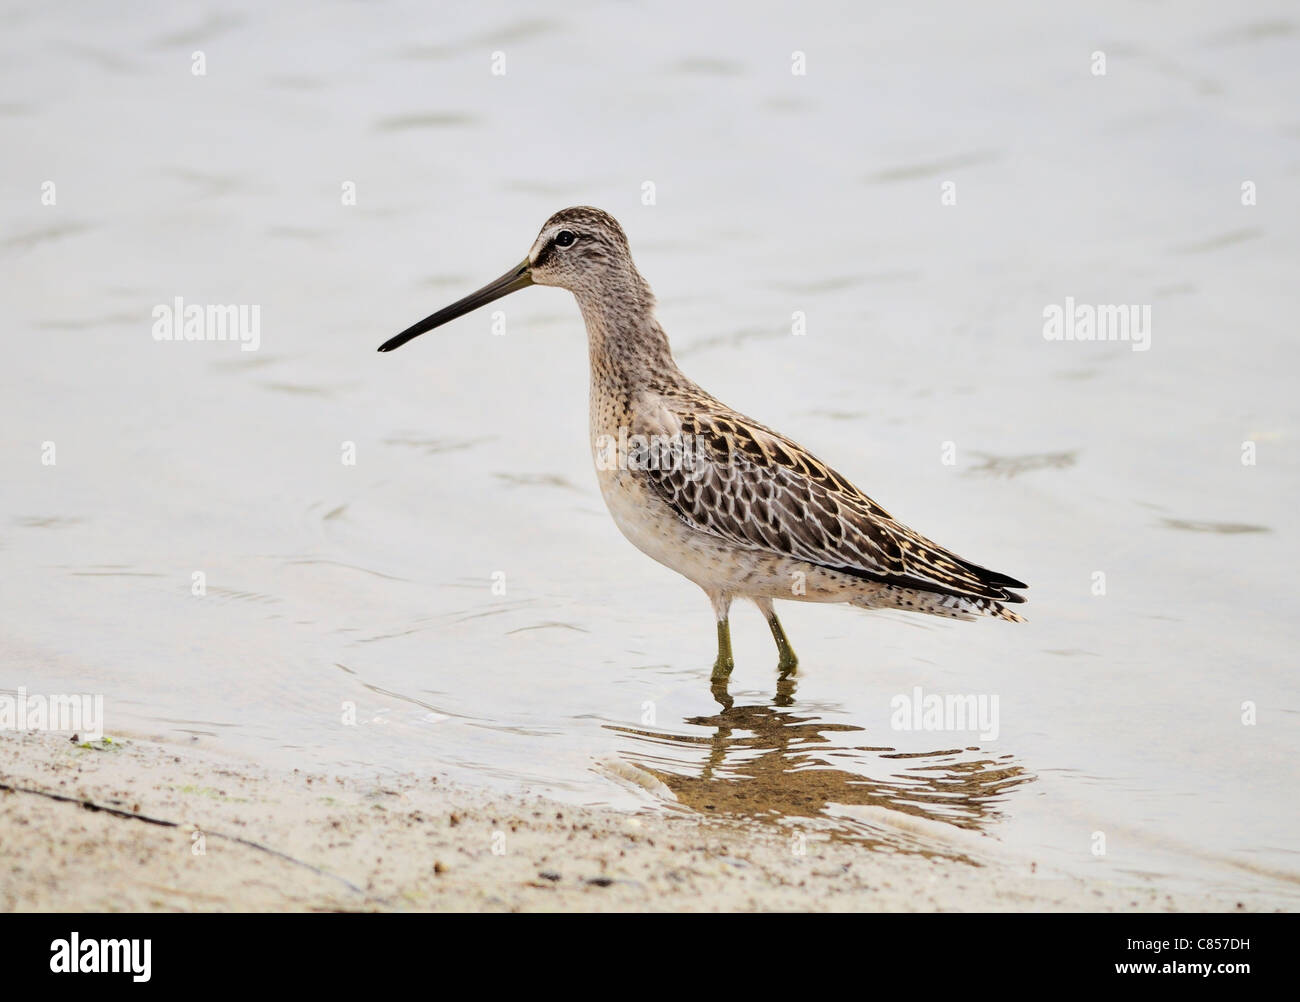 A Short-billed Dowitcher bird - Limnodromus griseus,seen here standing on the shore. Stock Photo